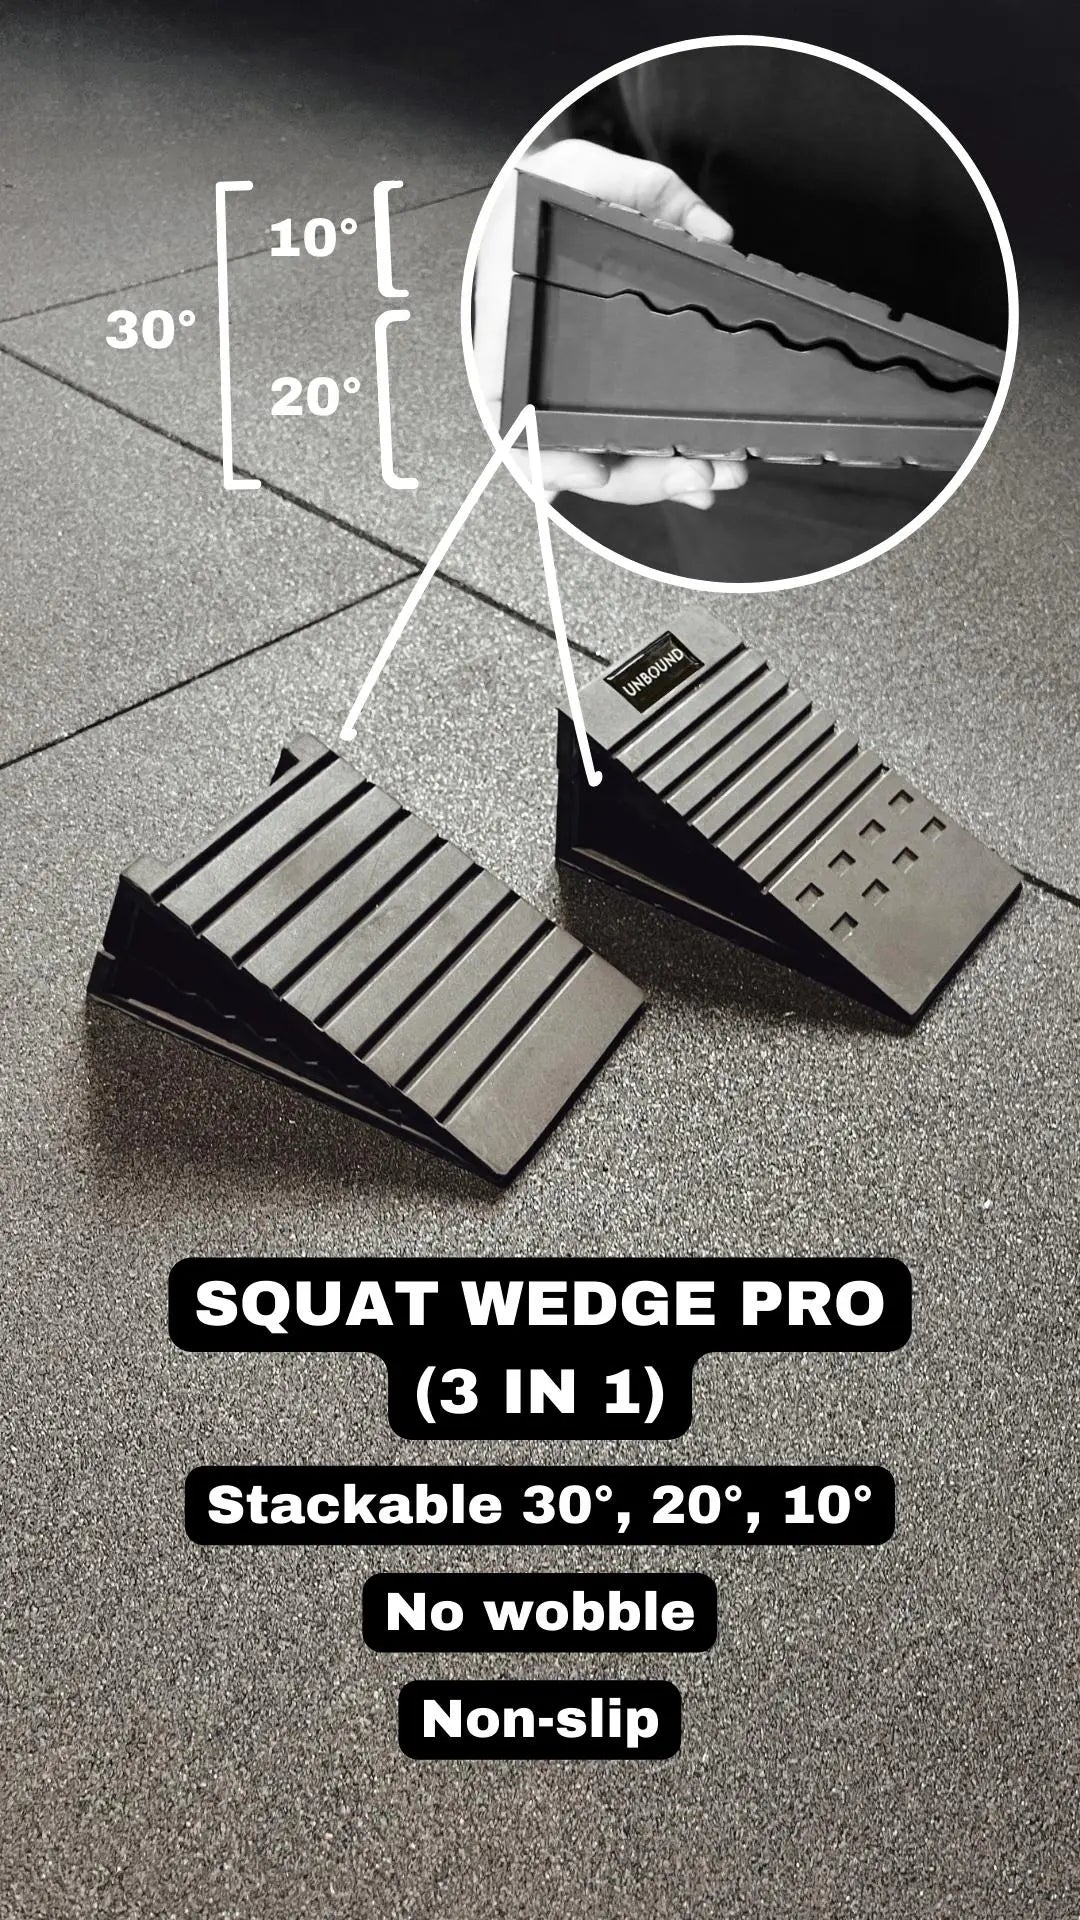 infographic with wedges